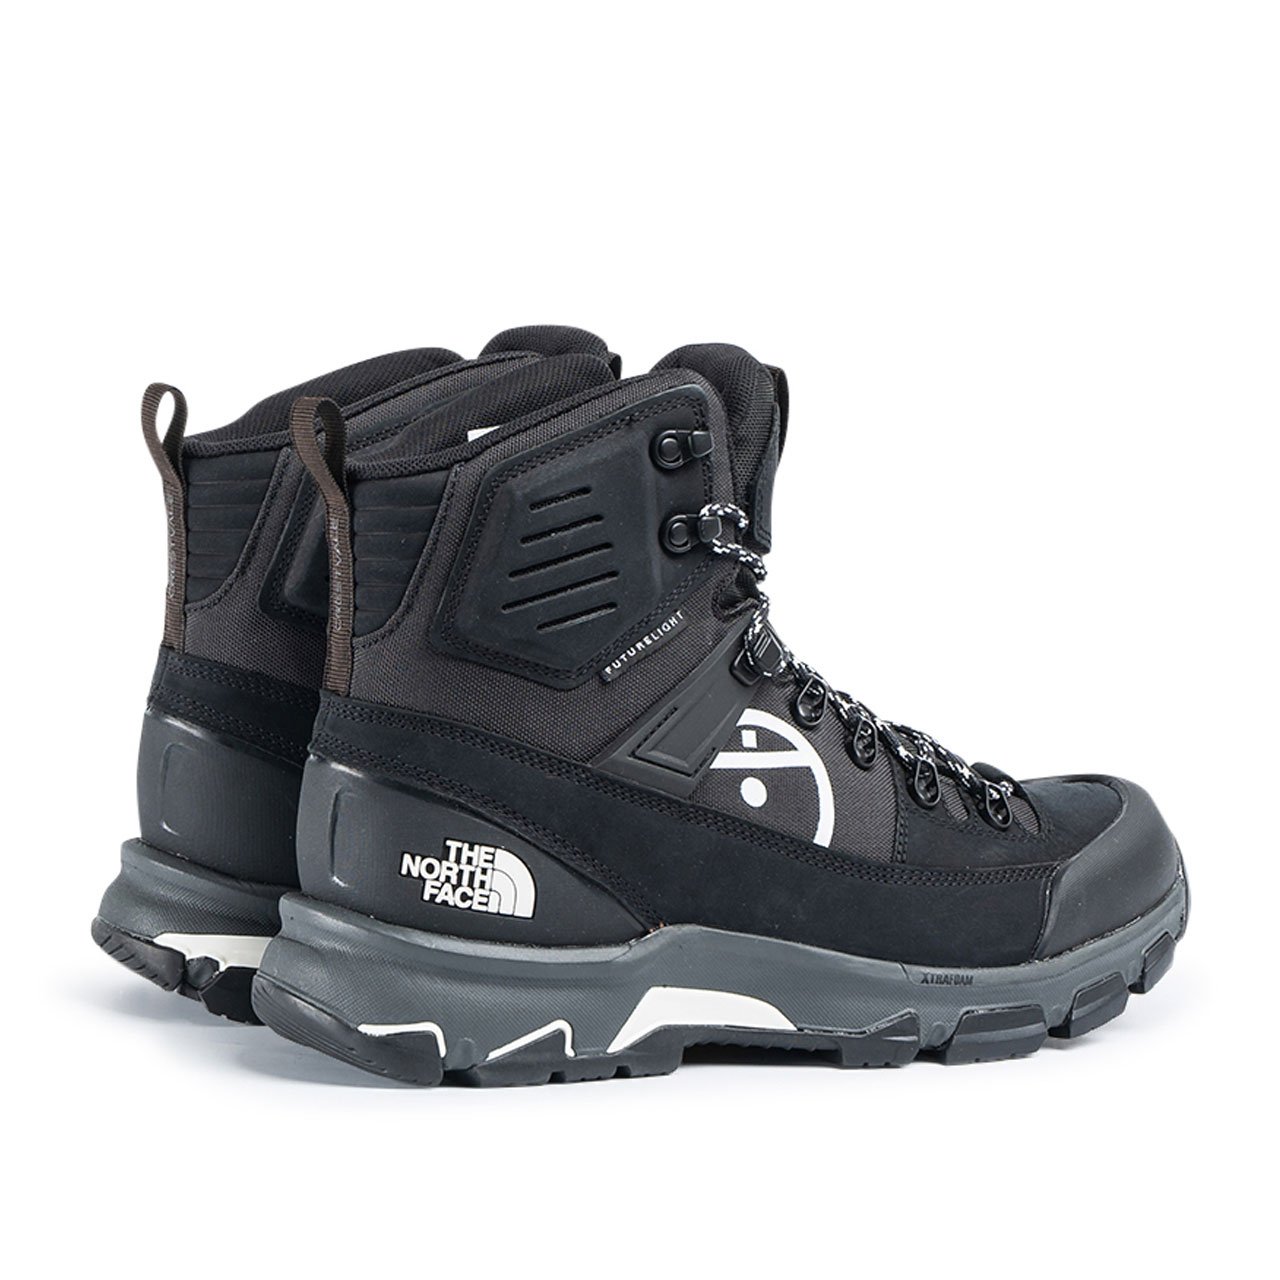 the north face black series steep tech crestvale boots (black